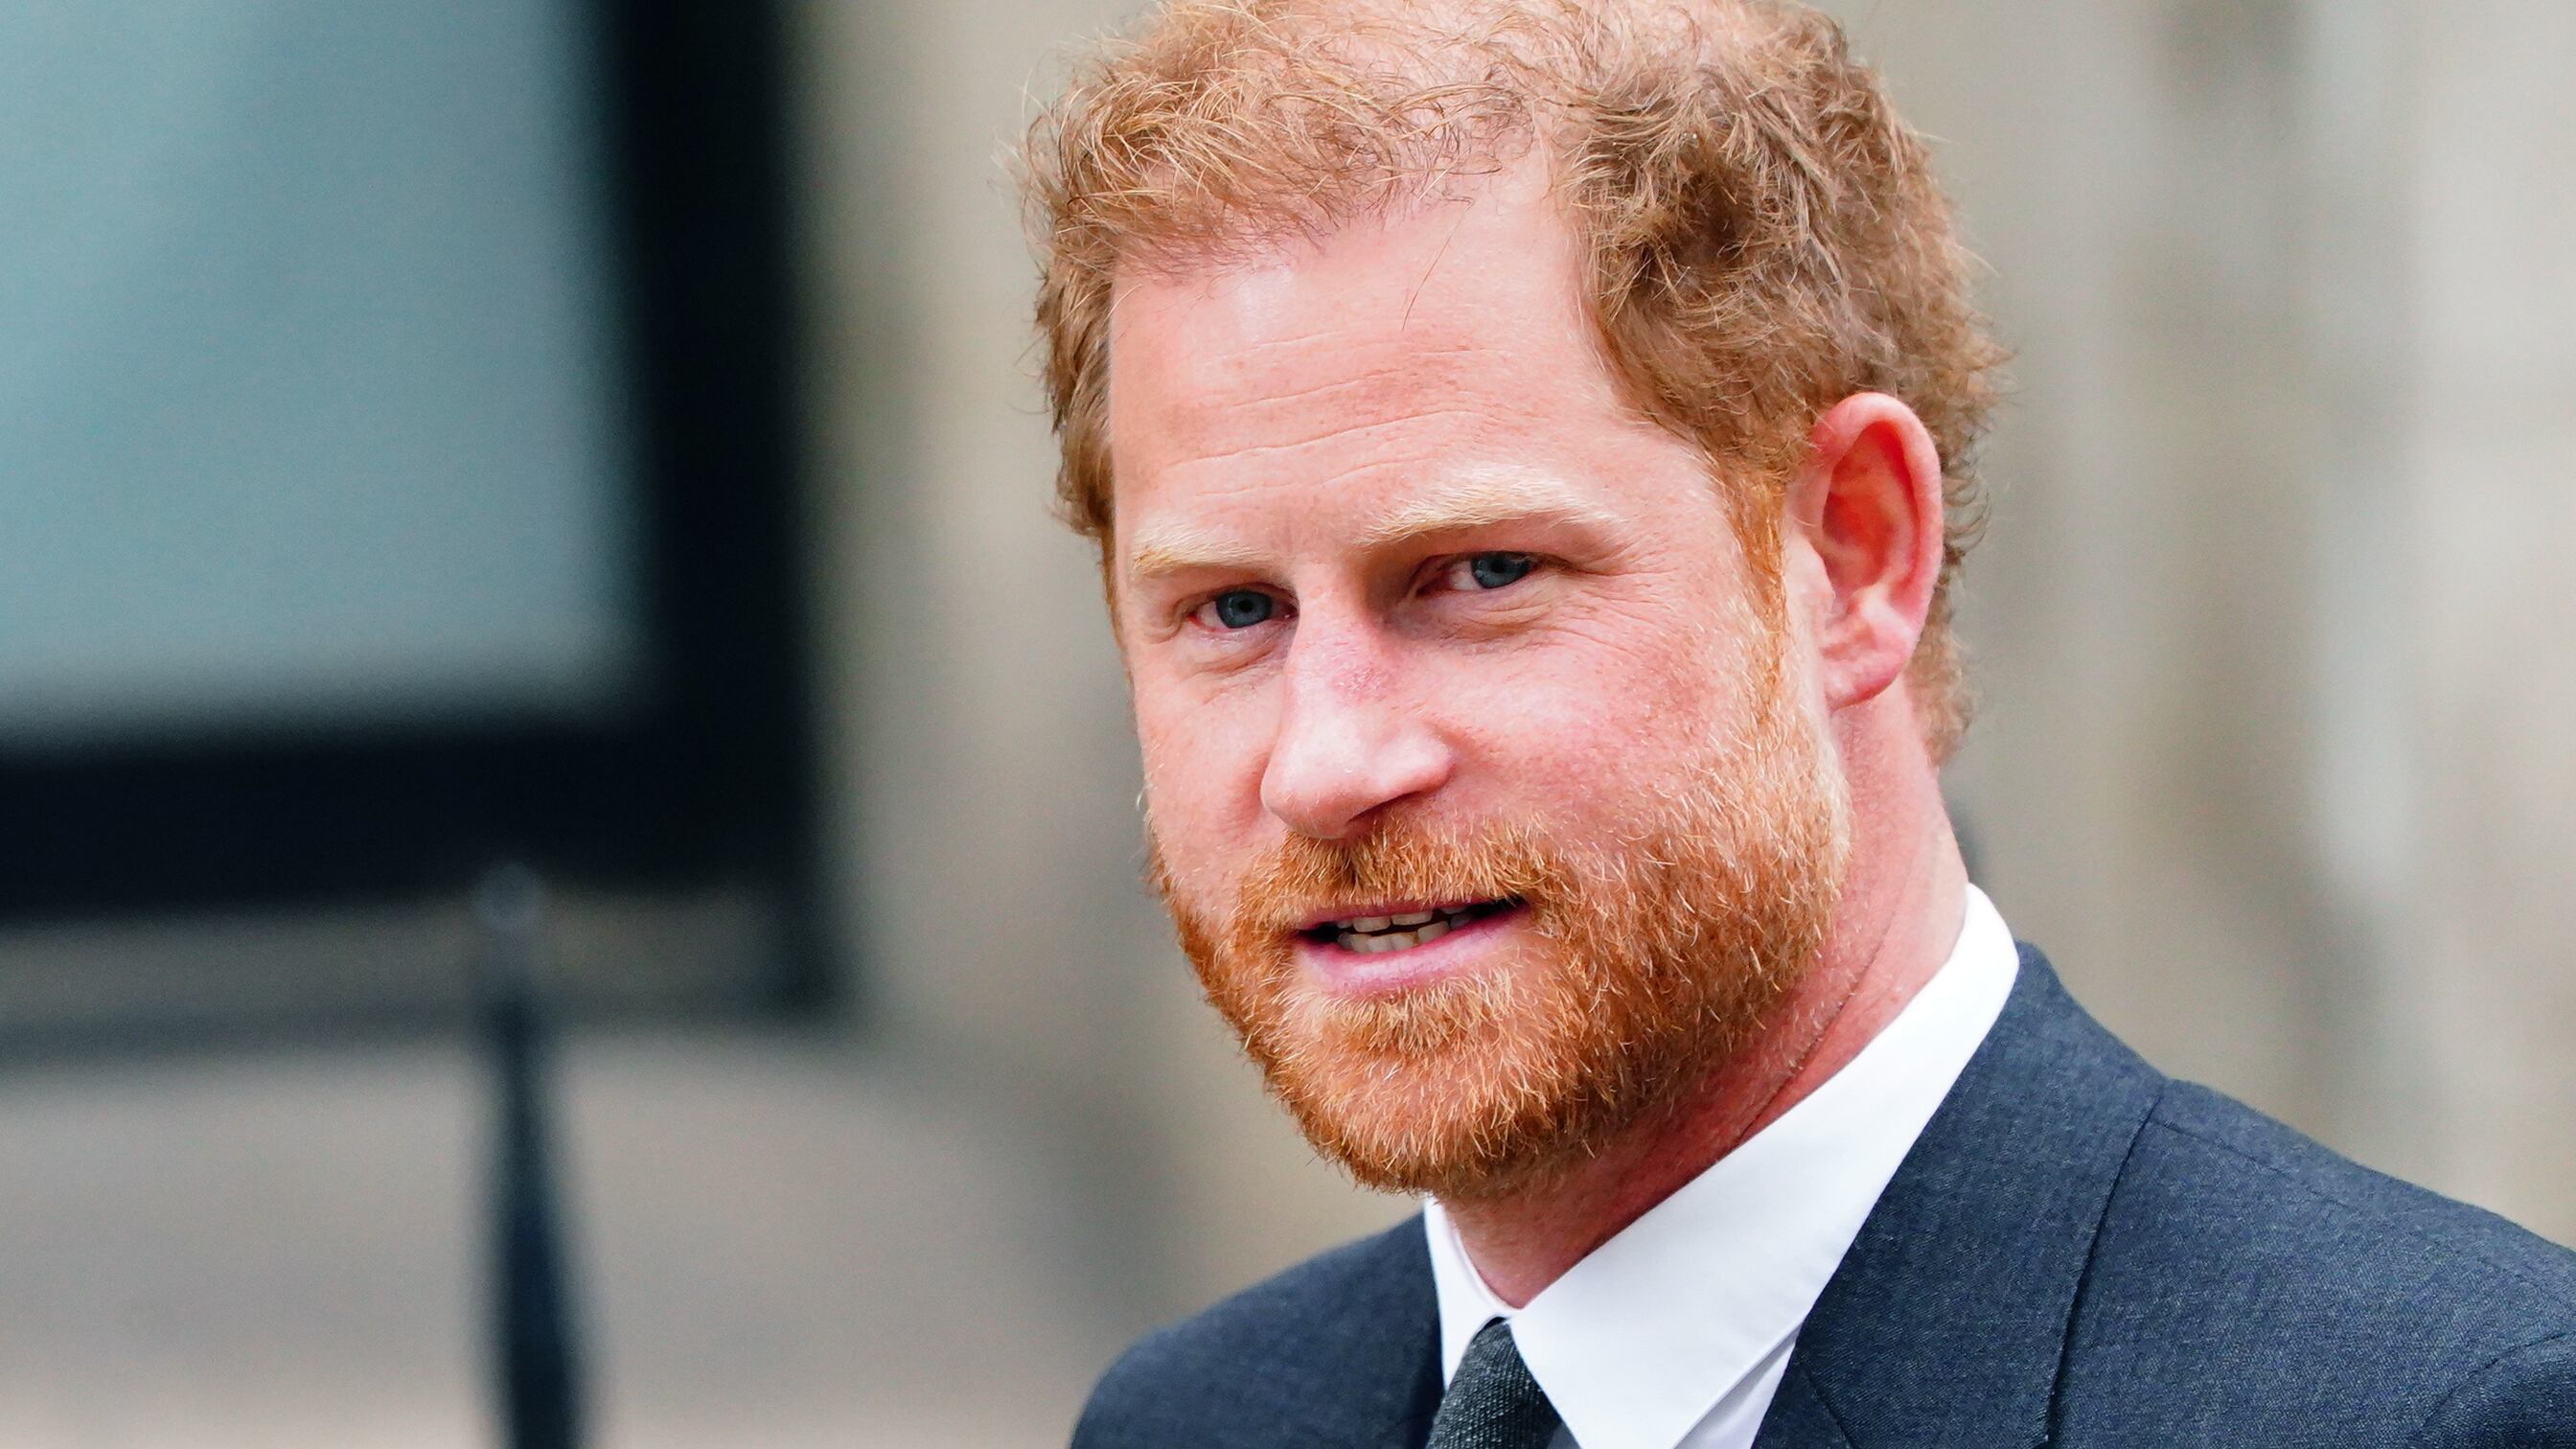 The Duke of Sussex’s phone was probably hacked to a ‘modest extent’, a judge has ruled